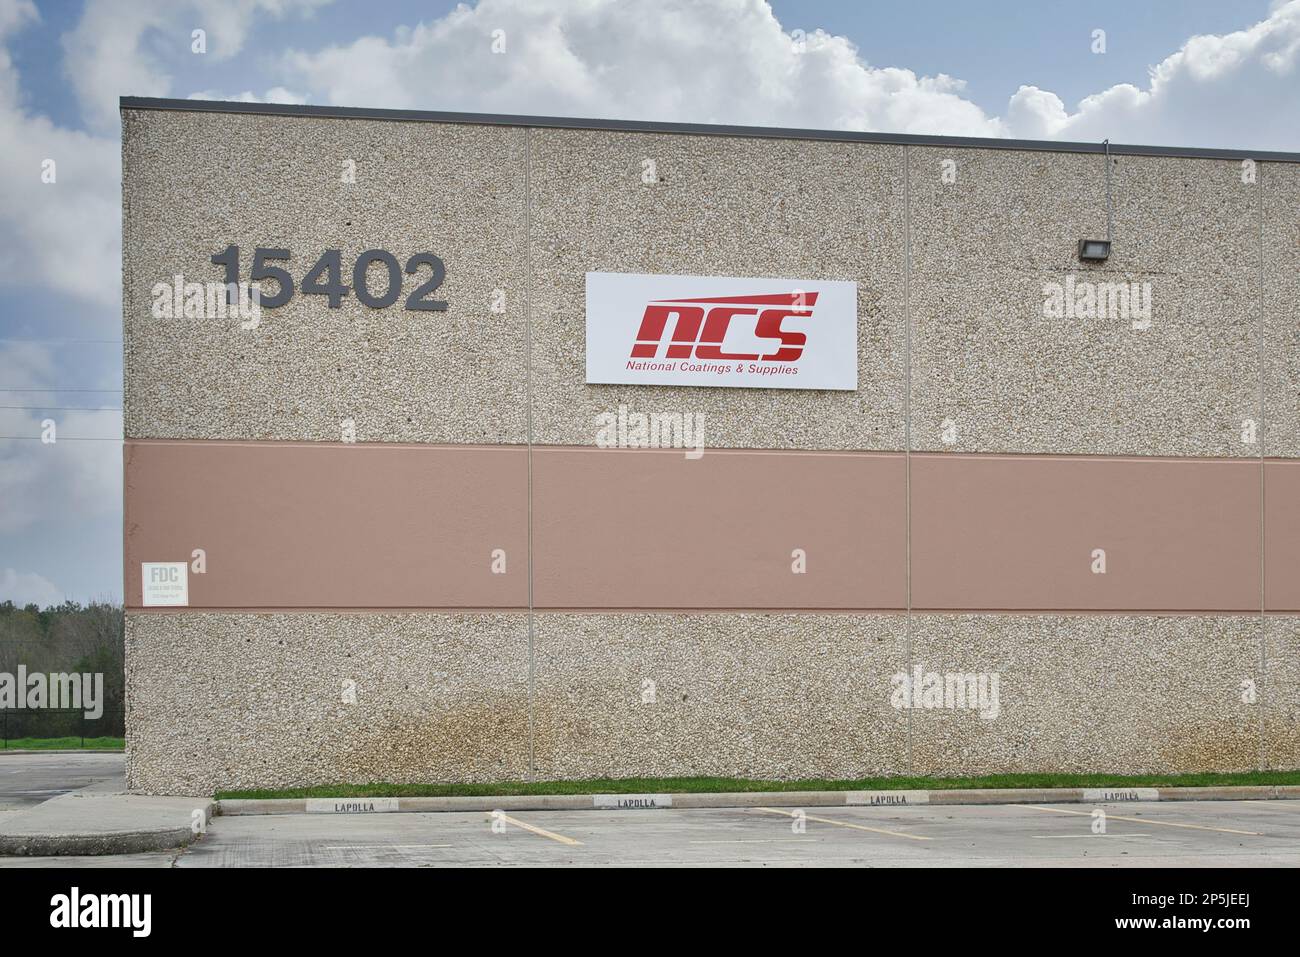 Houston, Texas USA 02-25-2023: National Coatings and Supplies NCS office building exterior in Houston, TX. Paint and coating distributor business. Stock Photo